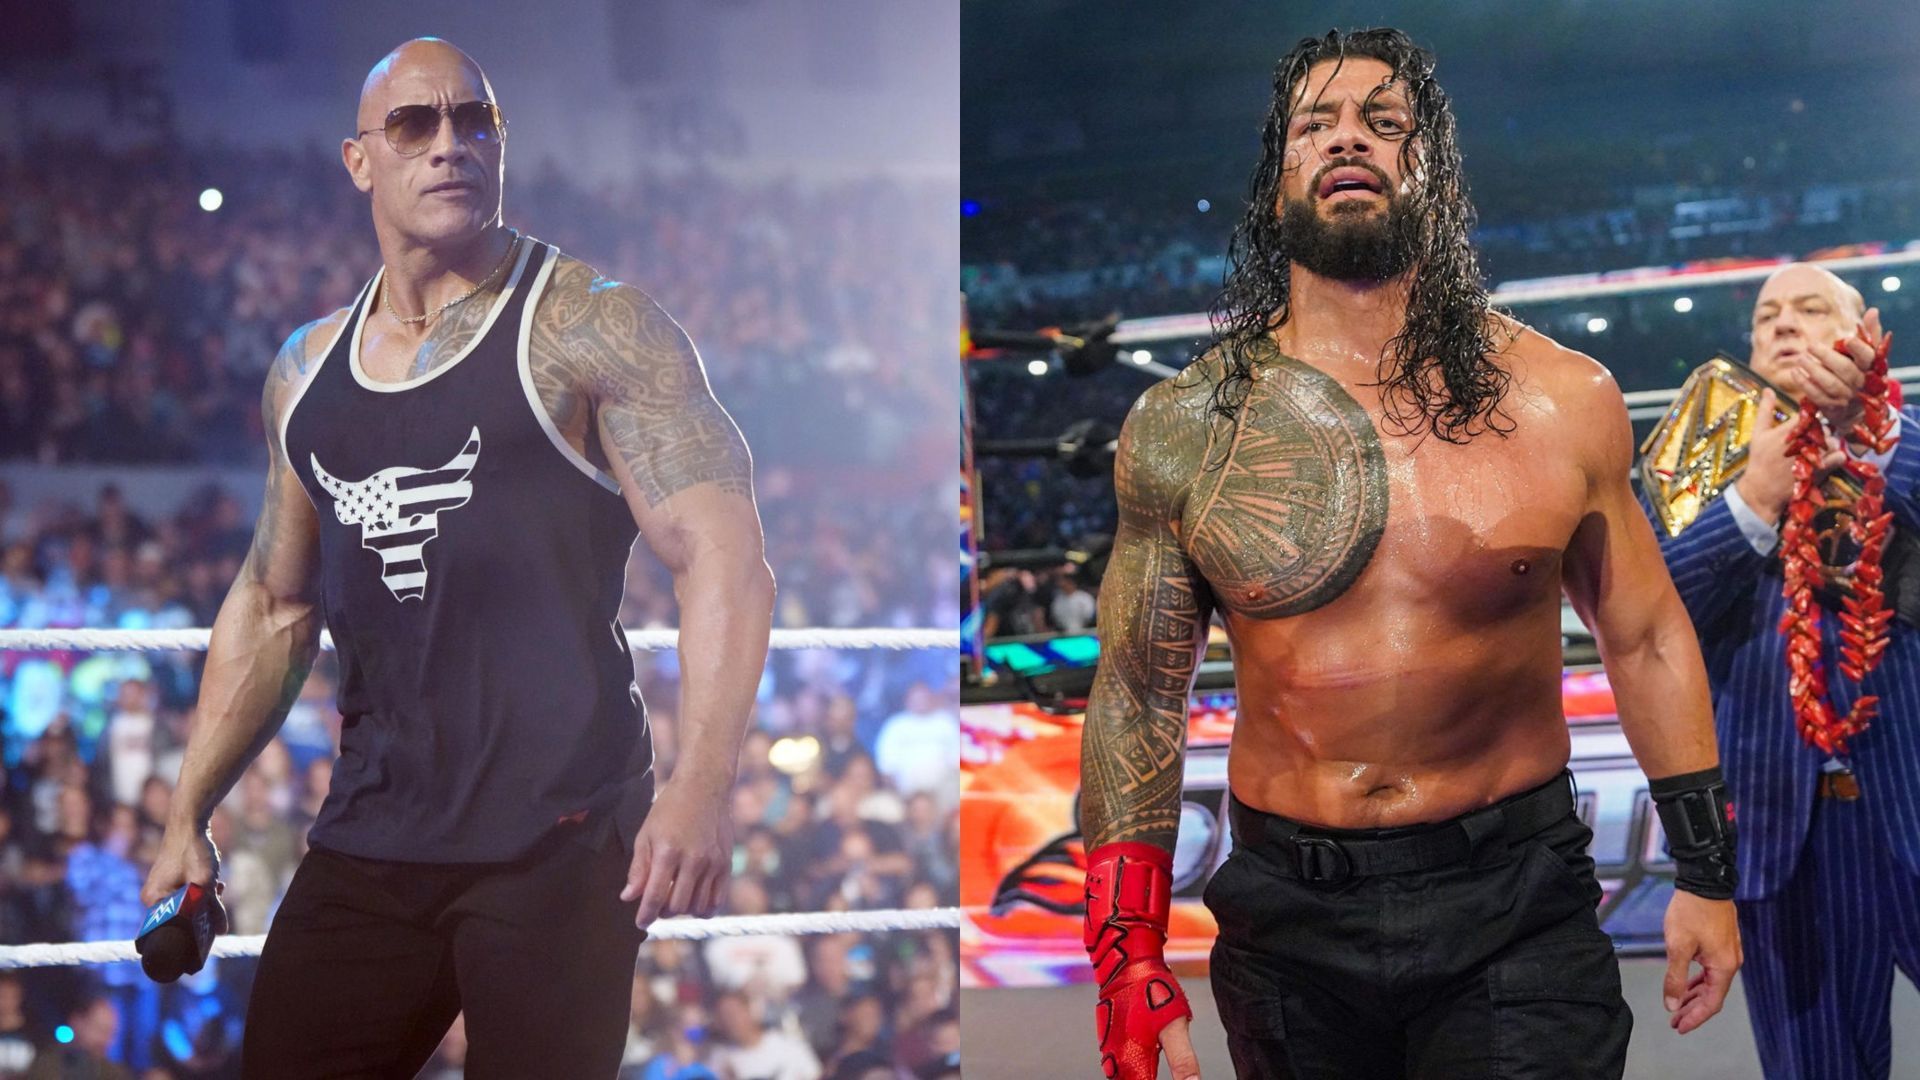 The Rock (left) and Undisputed WWE Universal Champion Roman Reigns (right)